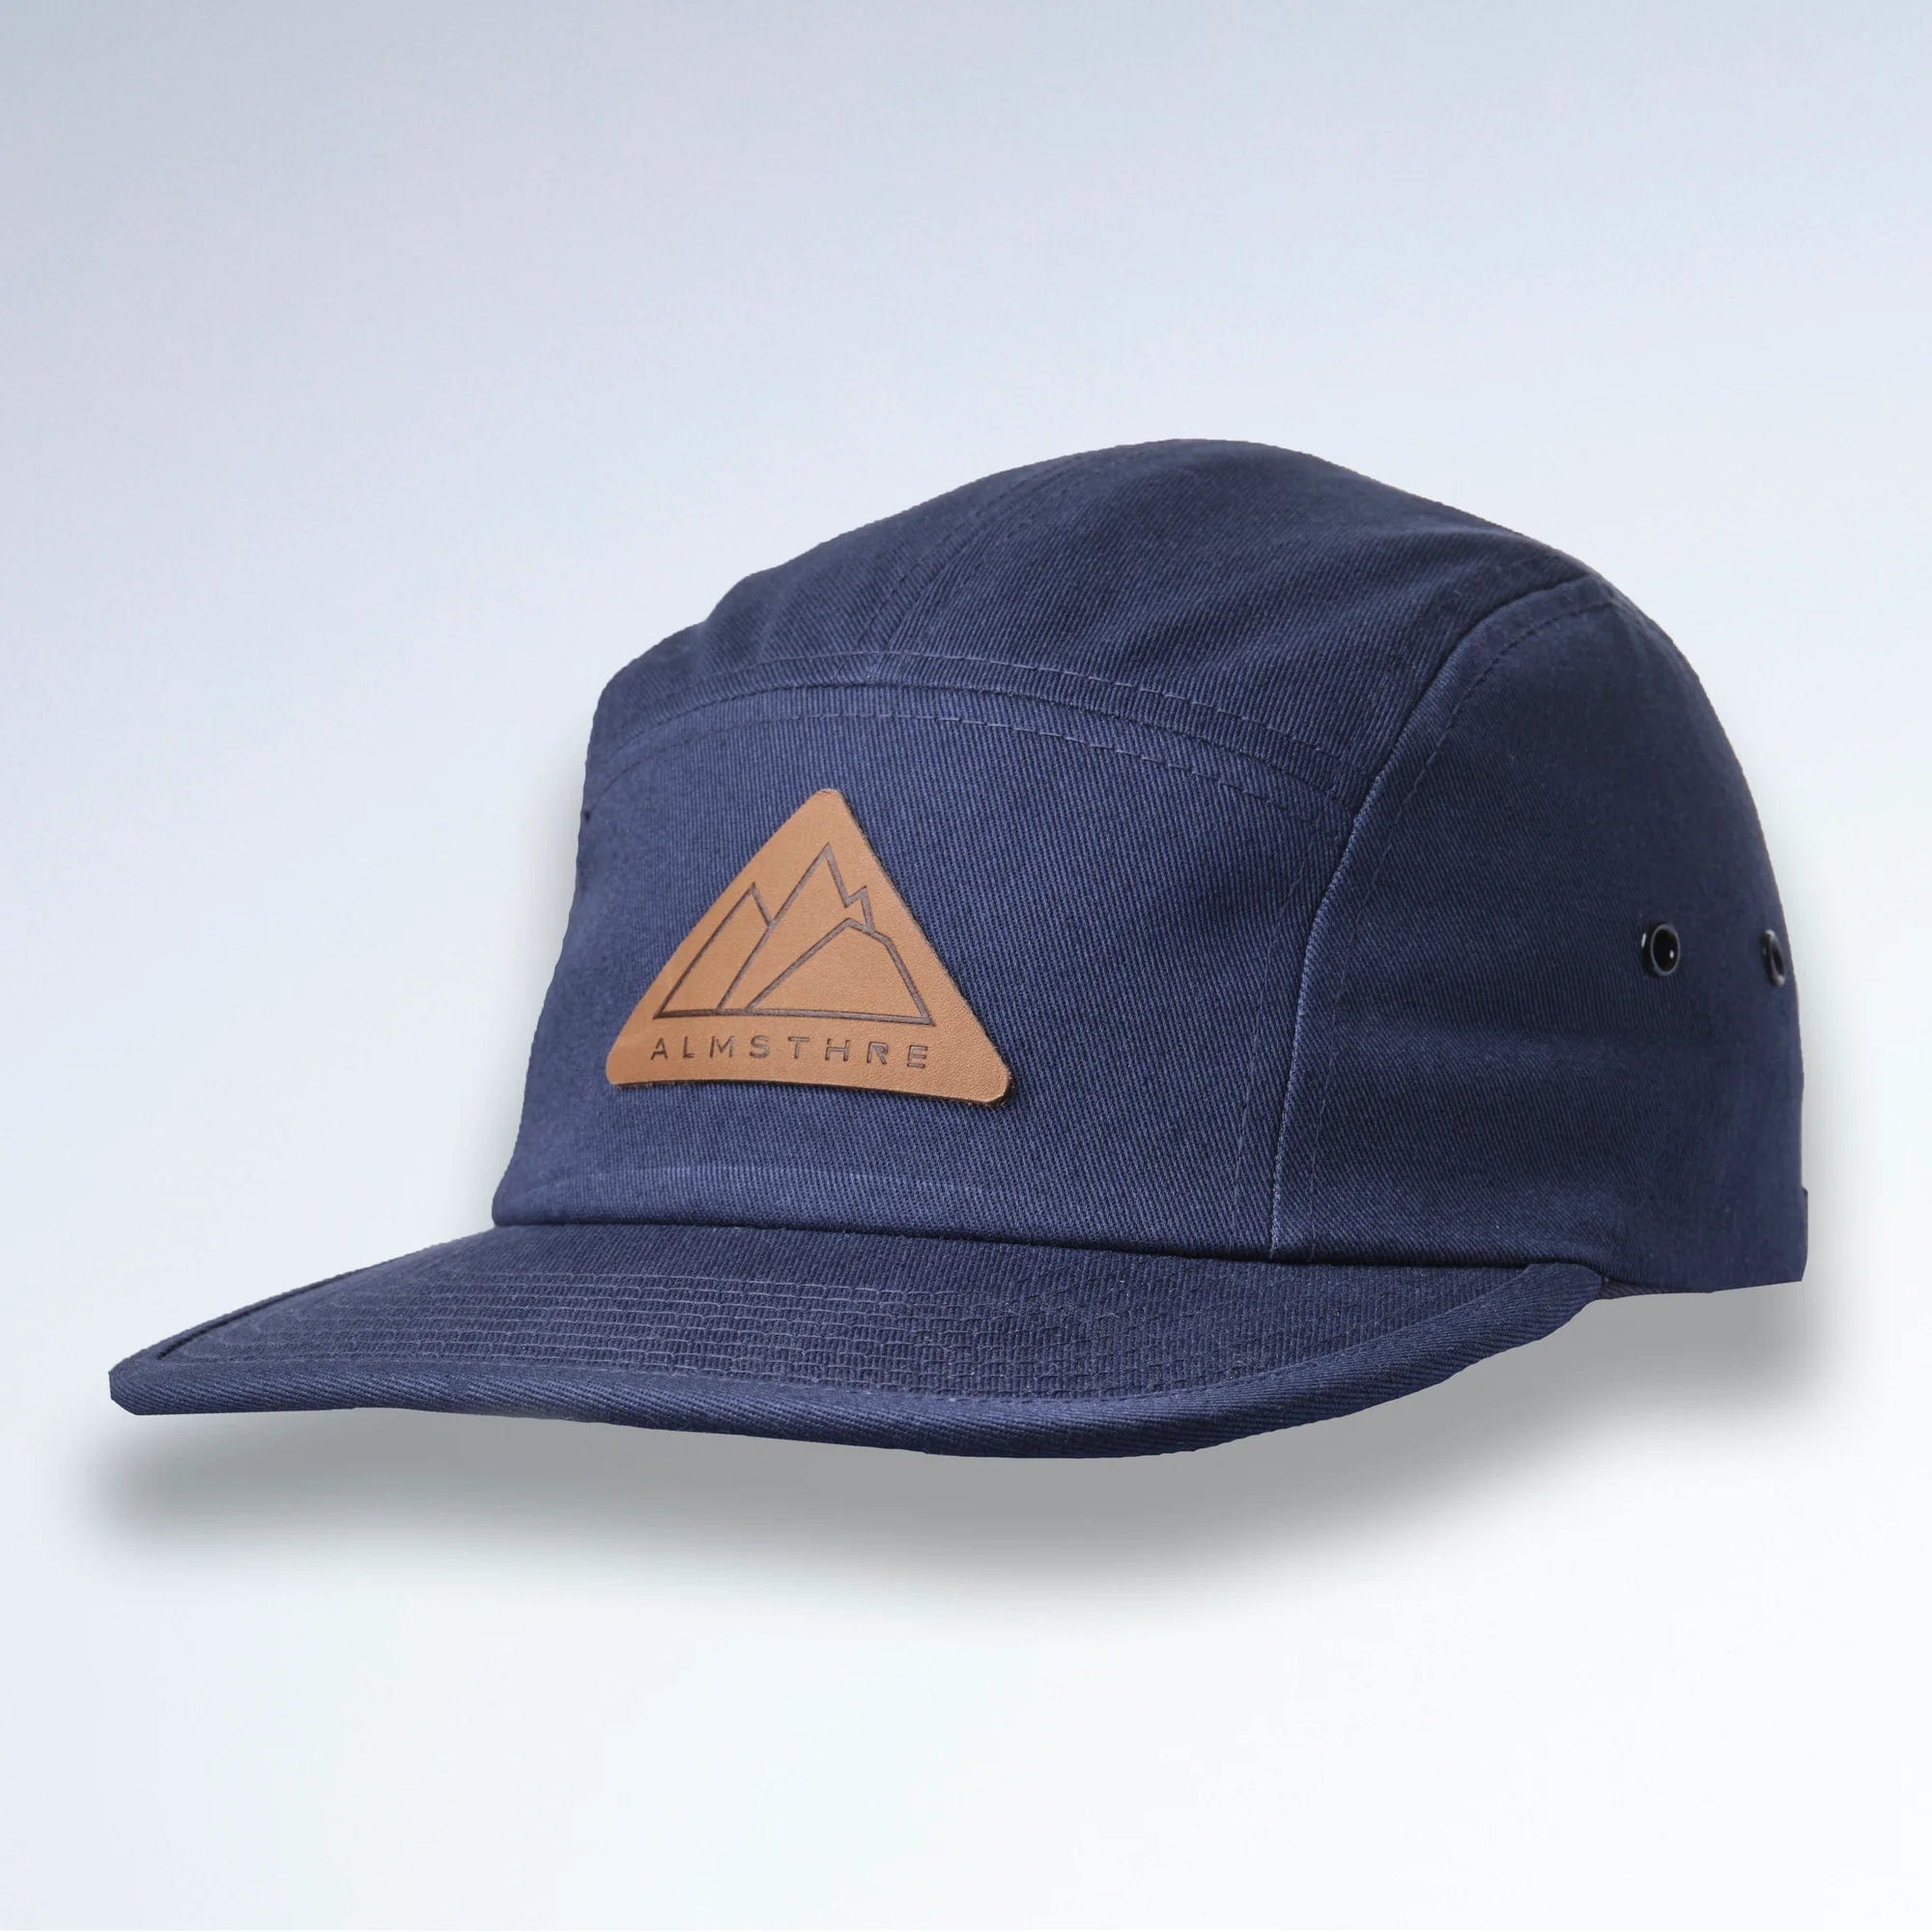 ALMSTHRE 5 Panel Hat Blue Apparel - Clothing - Casual Hats